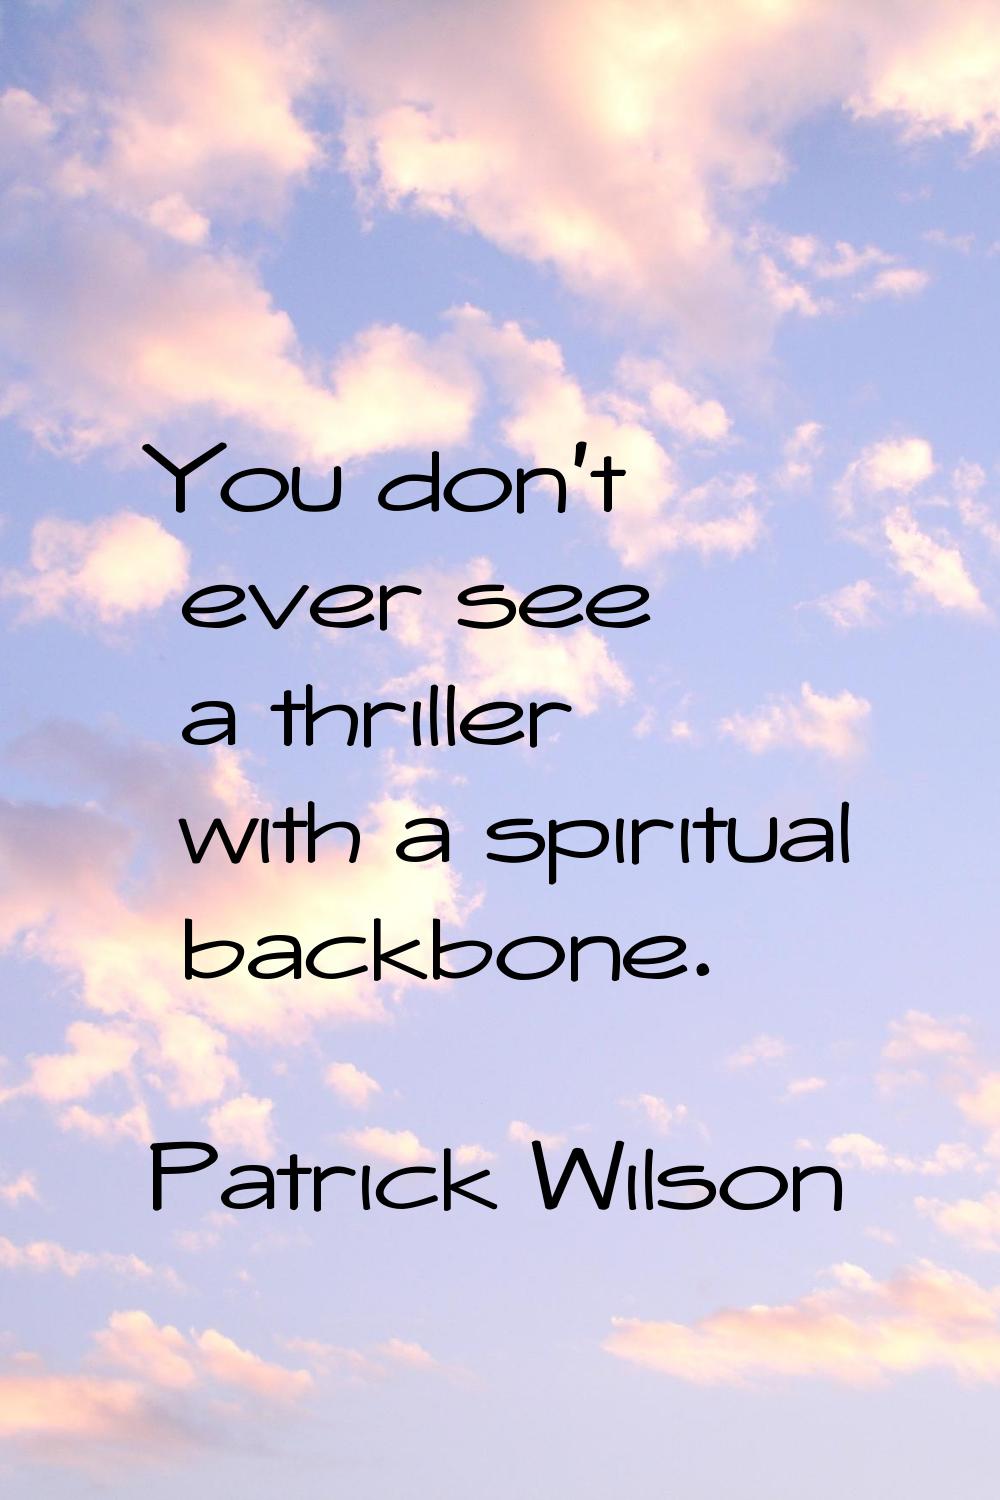 You don't ever see a thriller with a spiritual backbone.